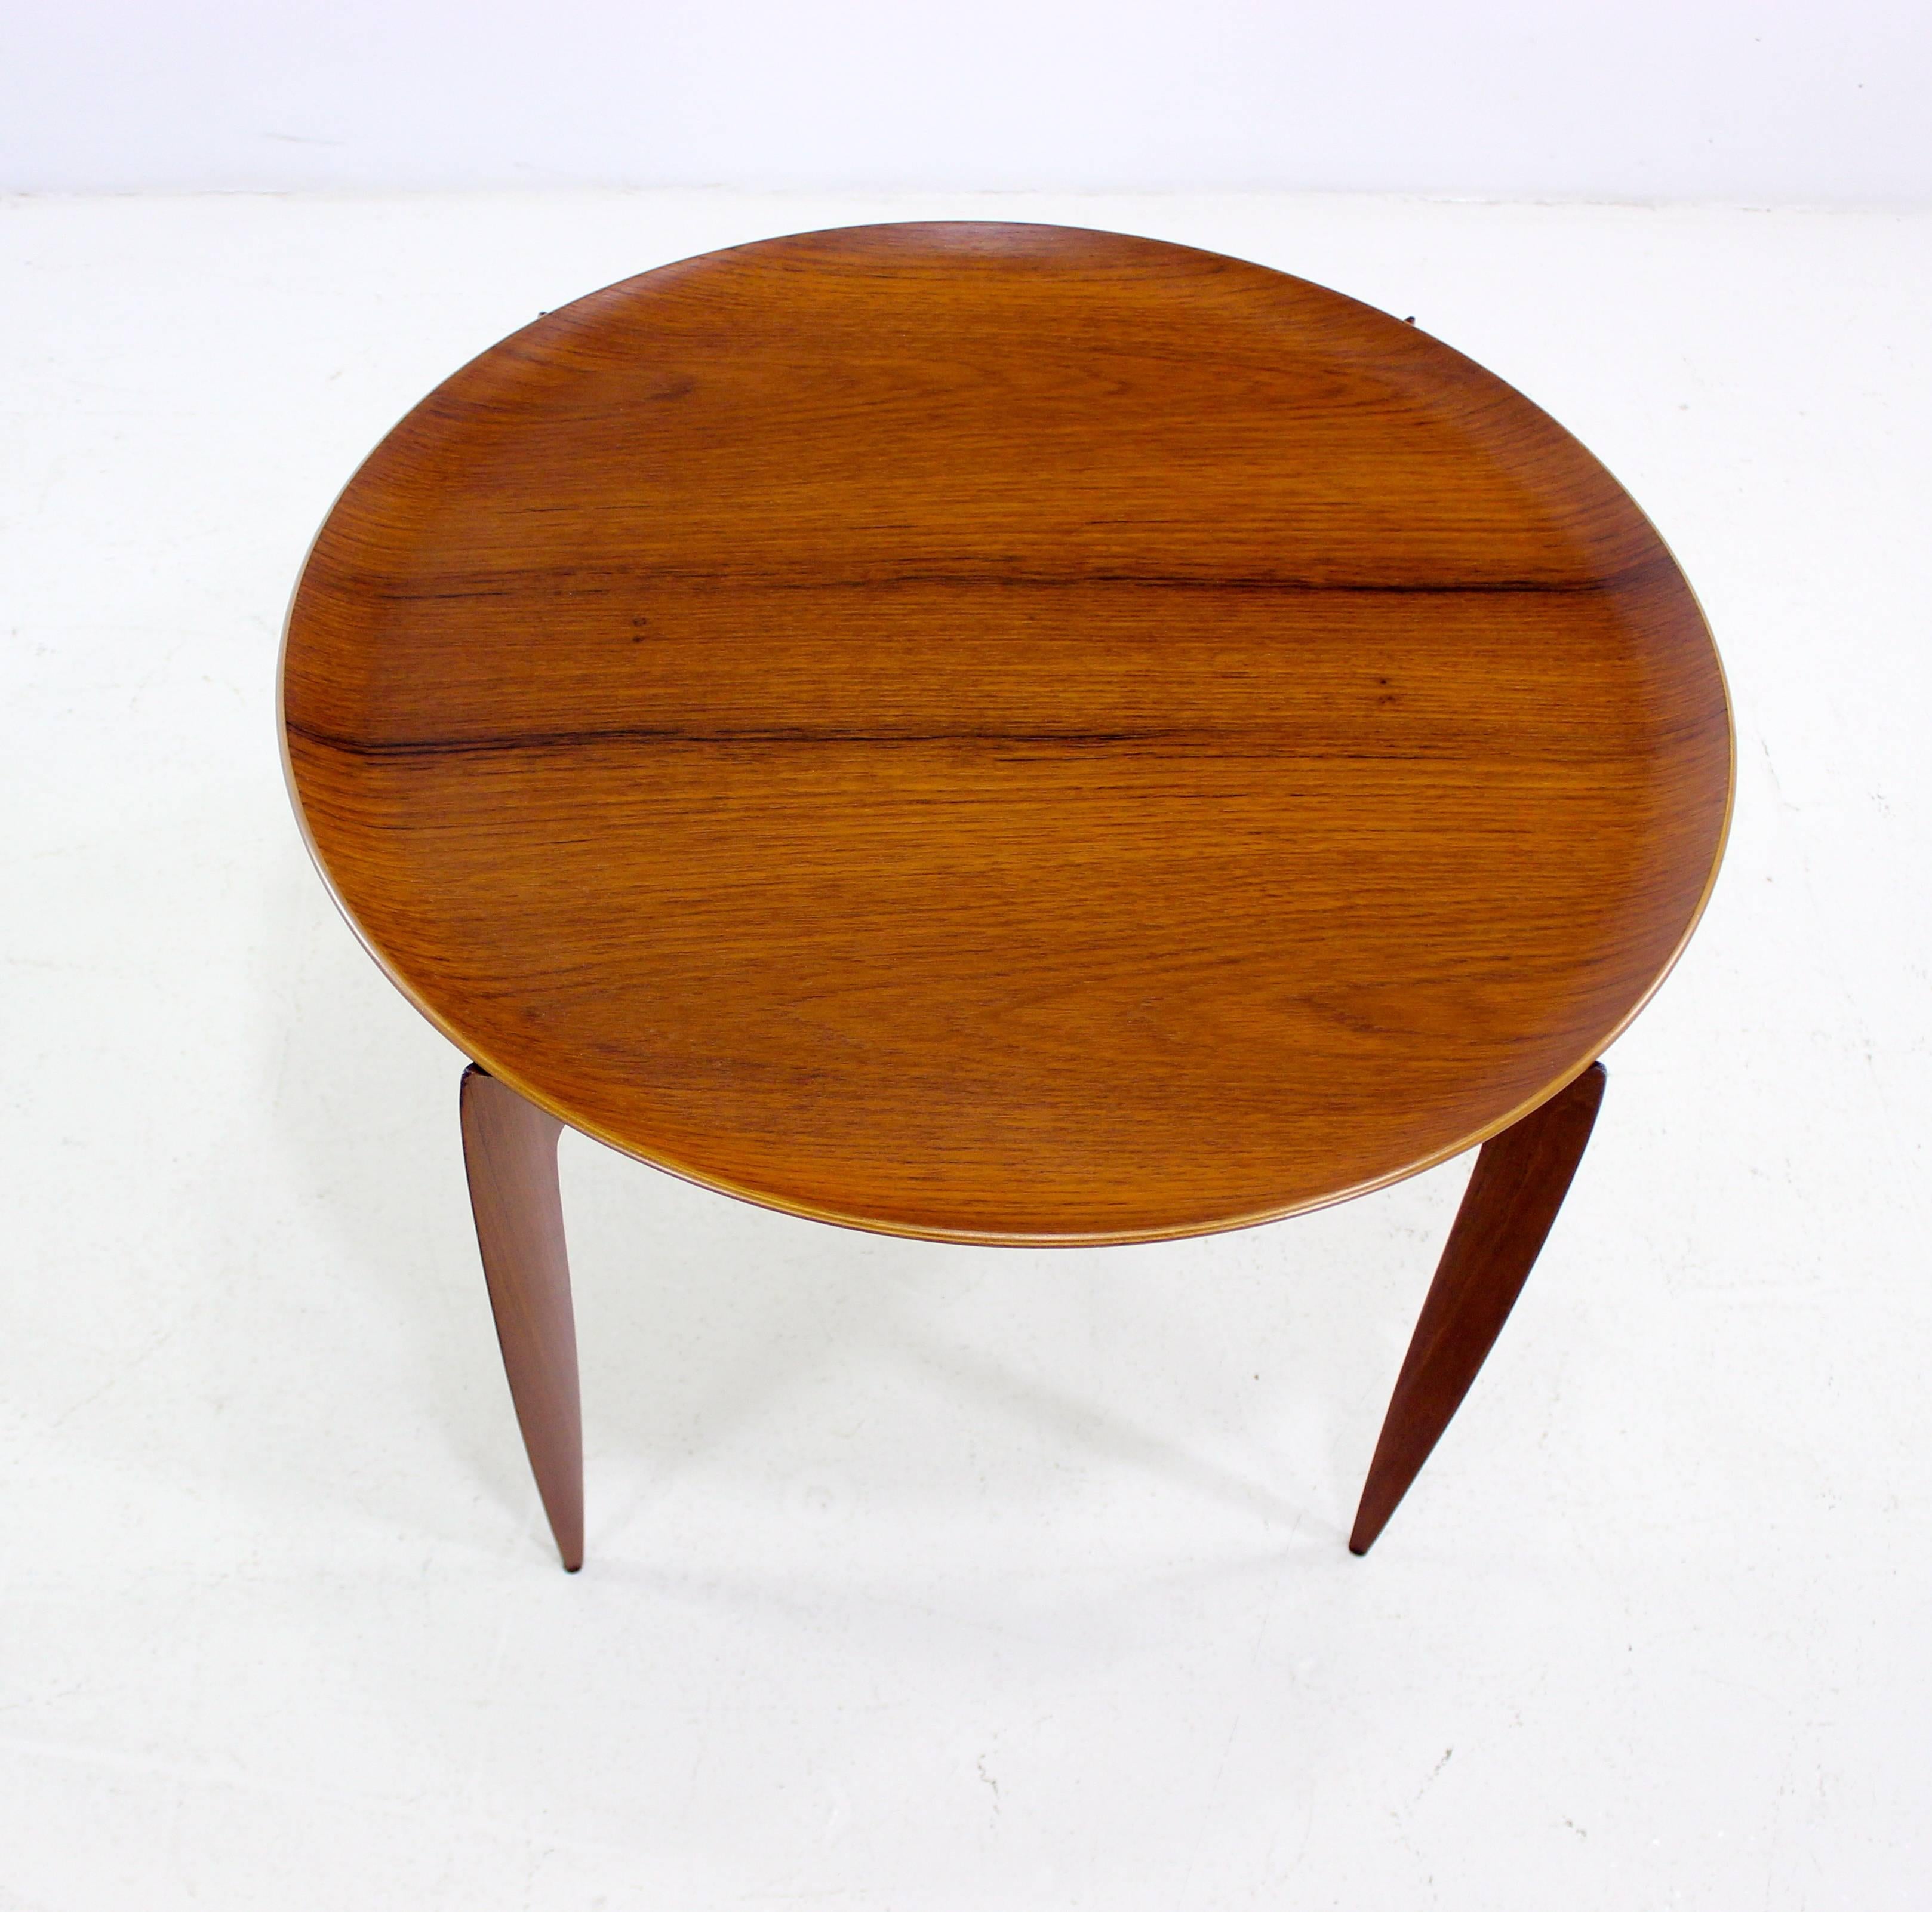 Danish modern tray table designed by H. Engholm and Svend Aage Willumsen. Fritz Hansen, maker.
Removable teak tray measuring 23.5